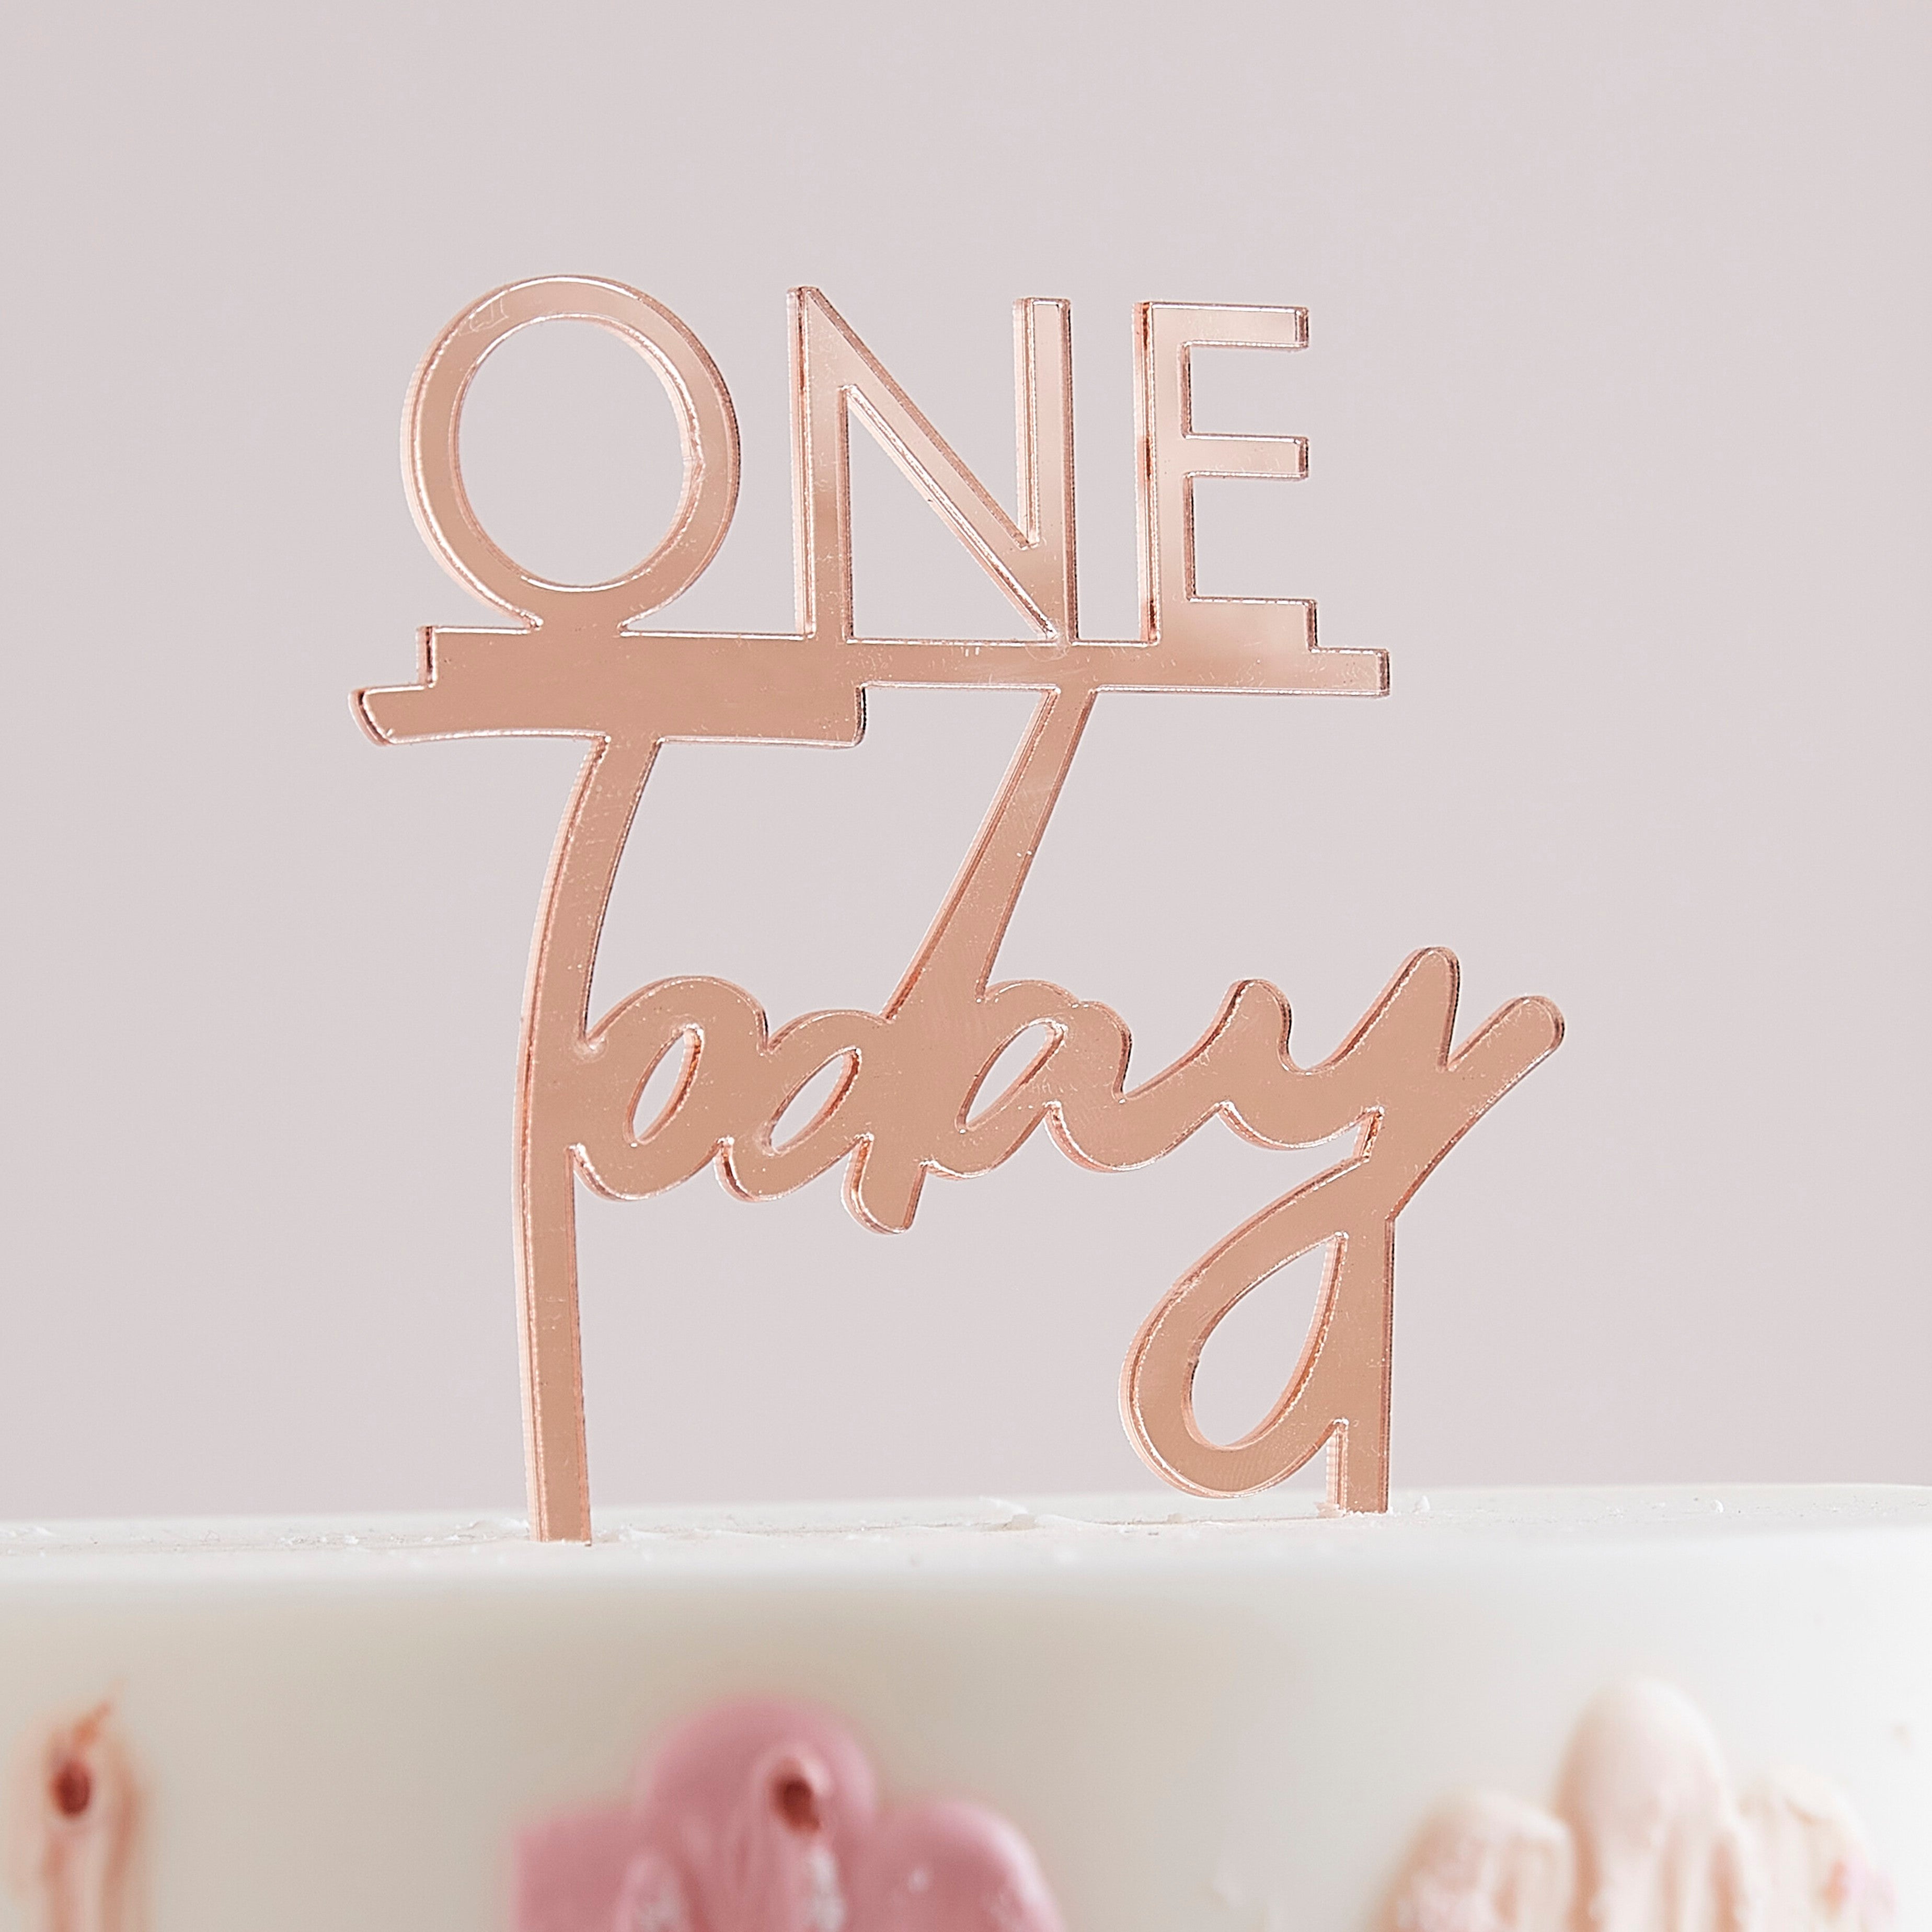 Cake topper Ginger Ray - One Today, rose gold